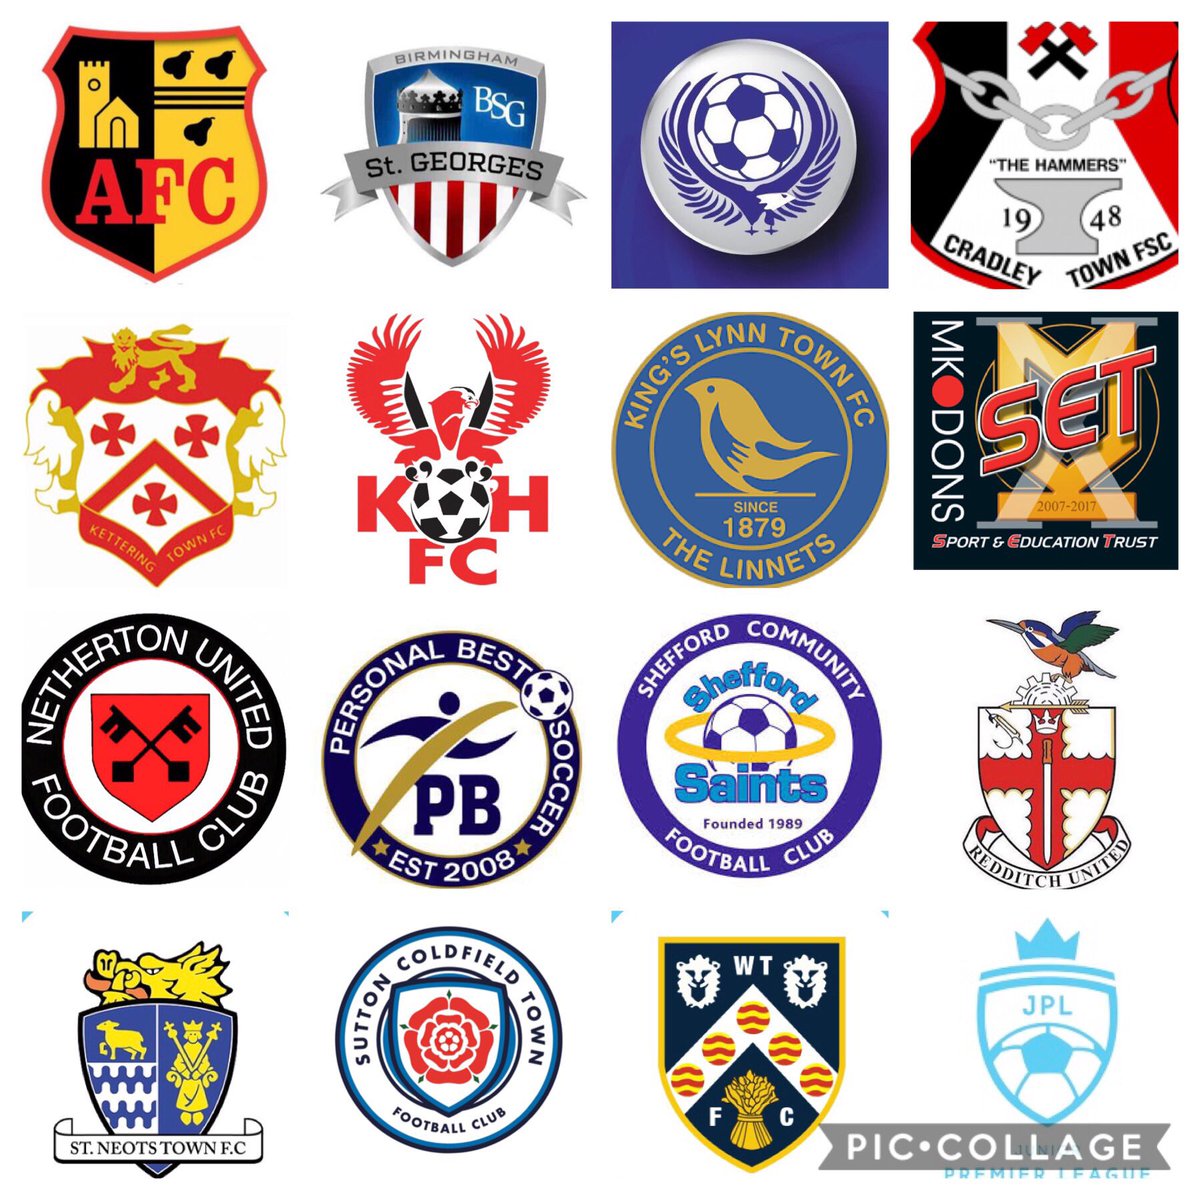 Our 2019/20 @JnrPremLeague season looks like this 👀 
#Playwiththebest